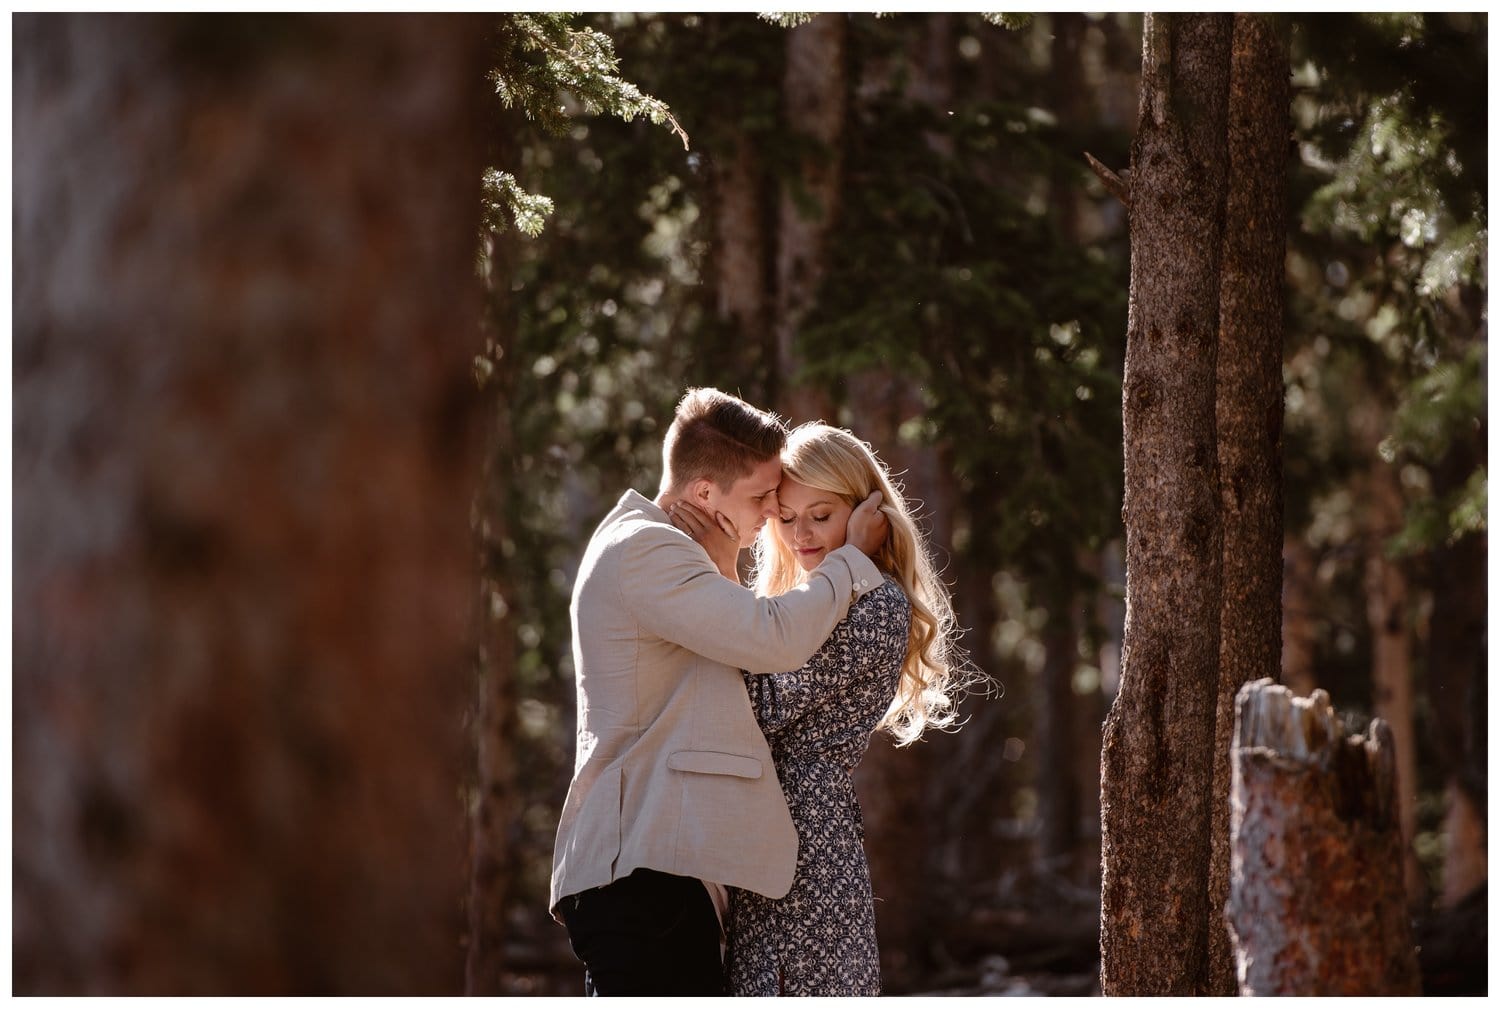 Couple embraces in a forest near Mt. Evans in Colorado. 